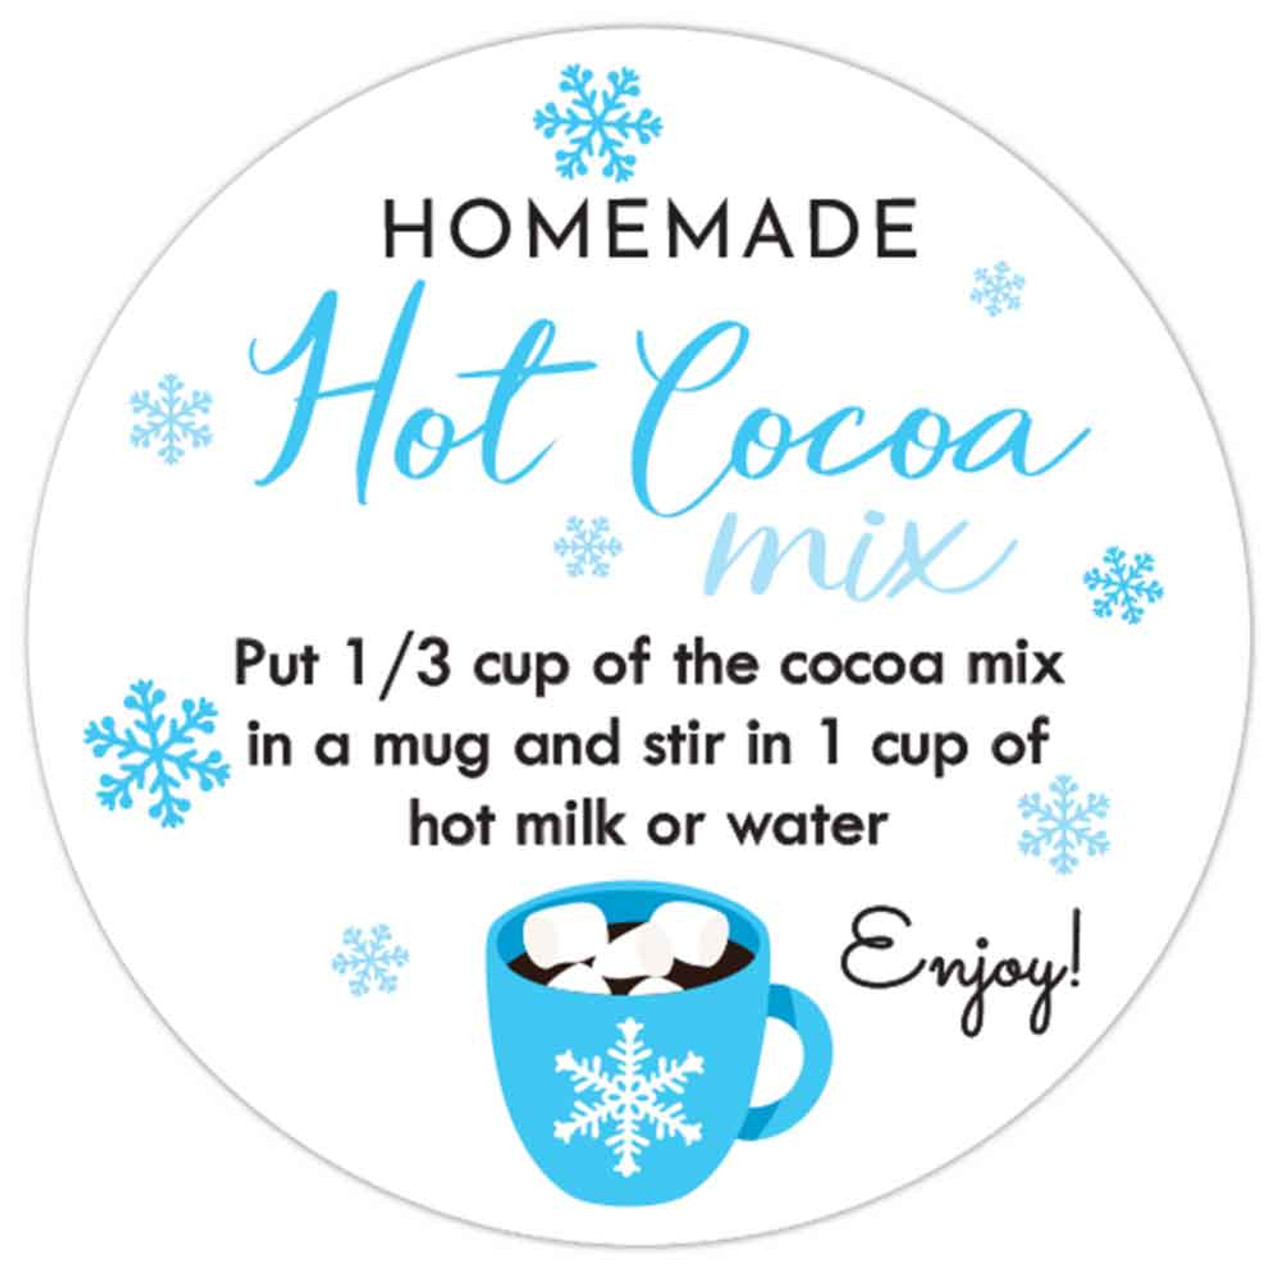 Hot cocoa bar kit 2.5 labels + 8x10 paper sign for Wedding party